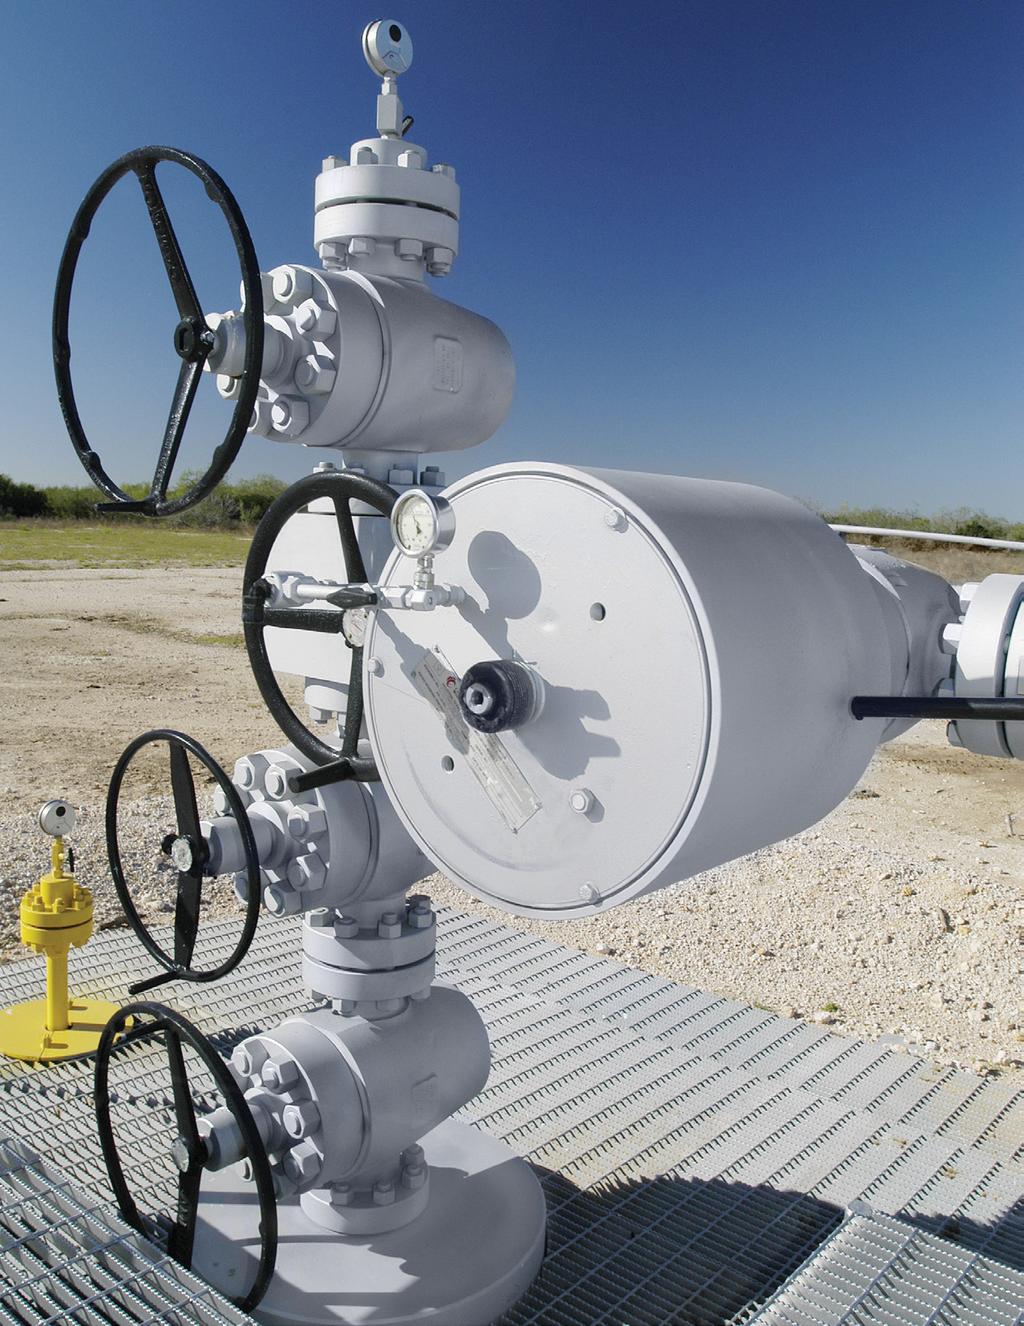 52 SURFACE SYSTEMS TECHNOLOGY ACTUATORS Cameron offers a broad